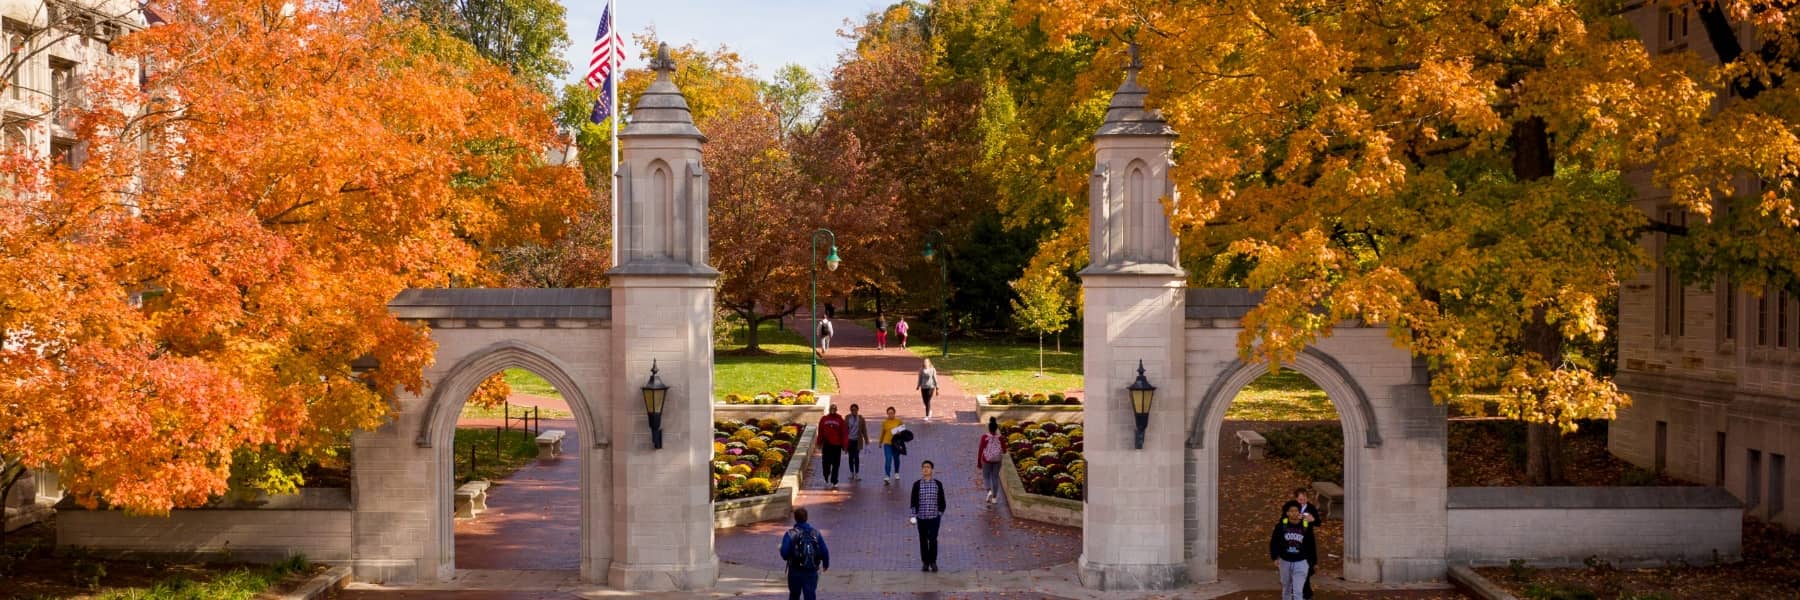 Photo of the Sample Gates in the fall with students walking.